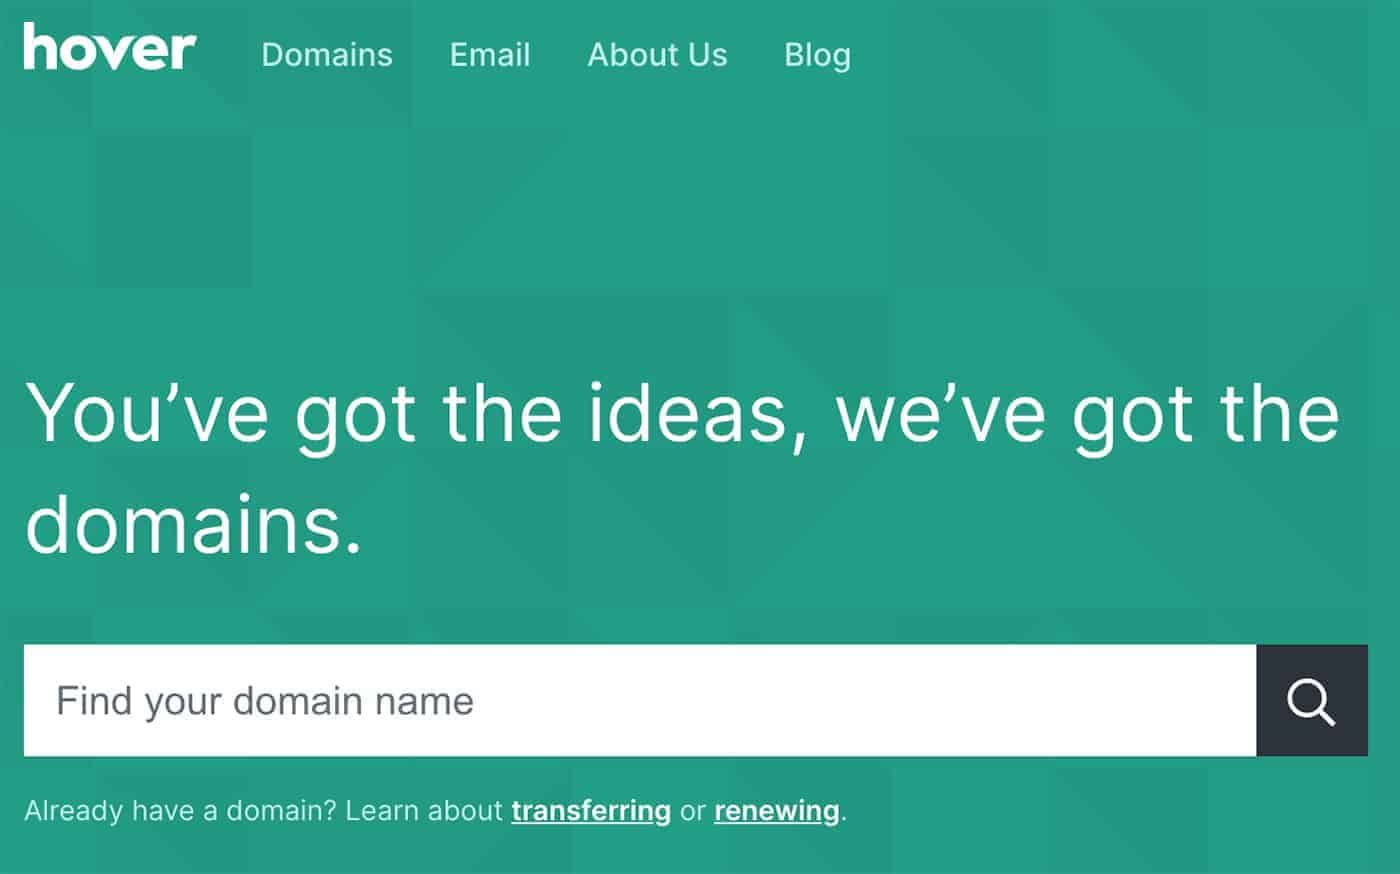 Hover is a great provider to register a domain name with.